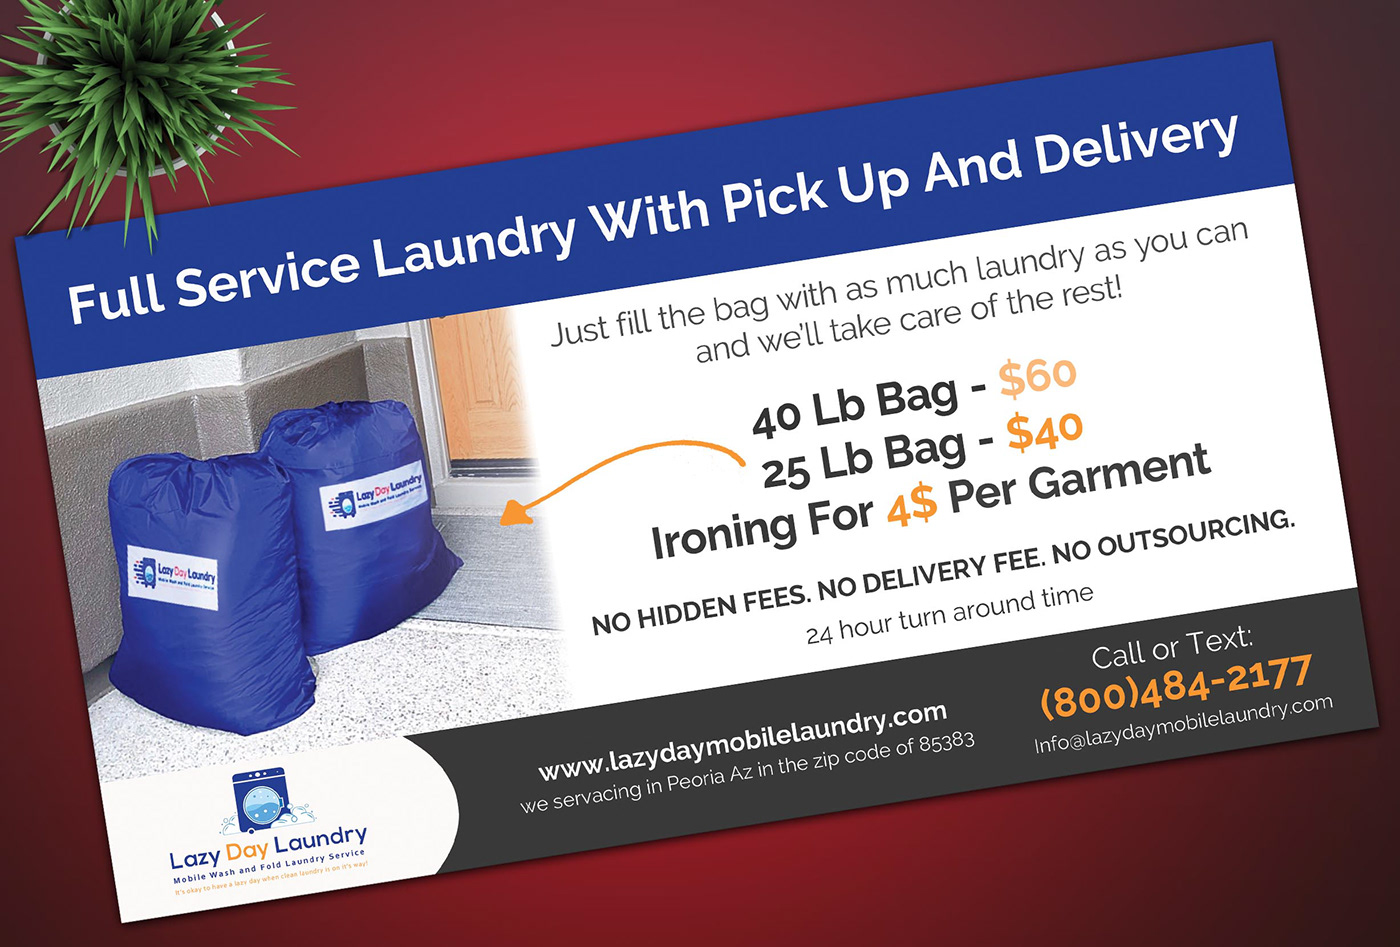 #laundryservice #laundryservices #clothes #showertime #scarf #knitted #cold #laundry #drycleaning #ironing